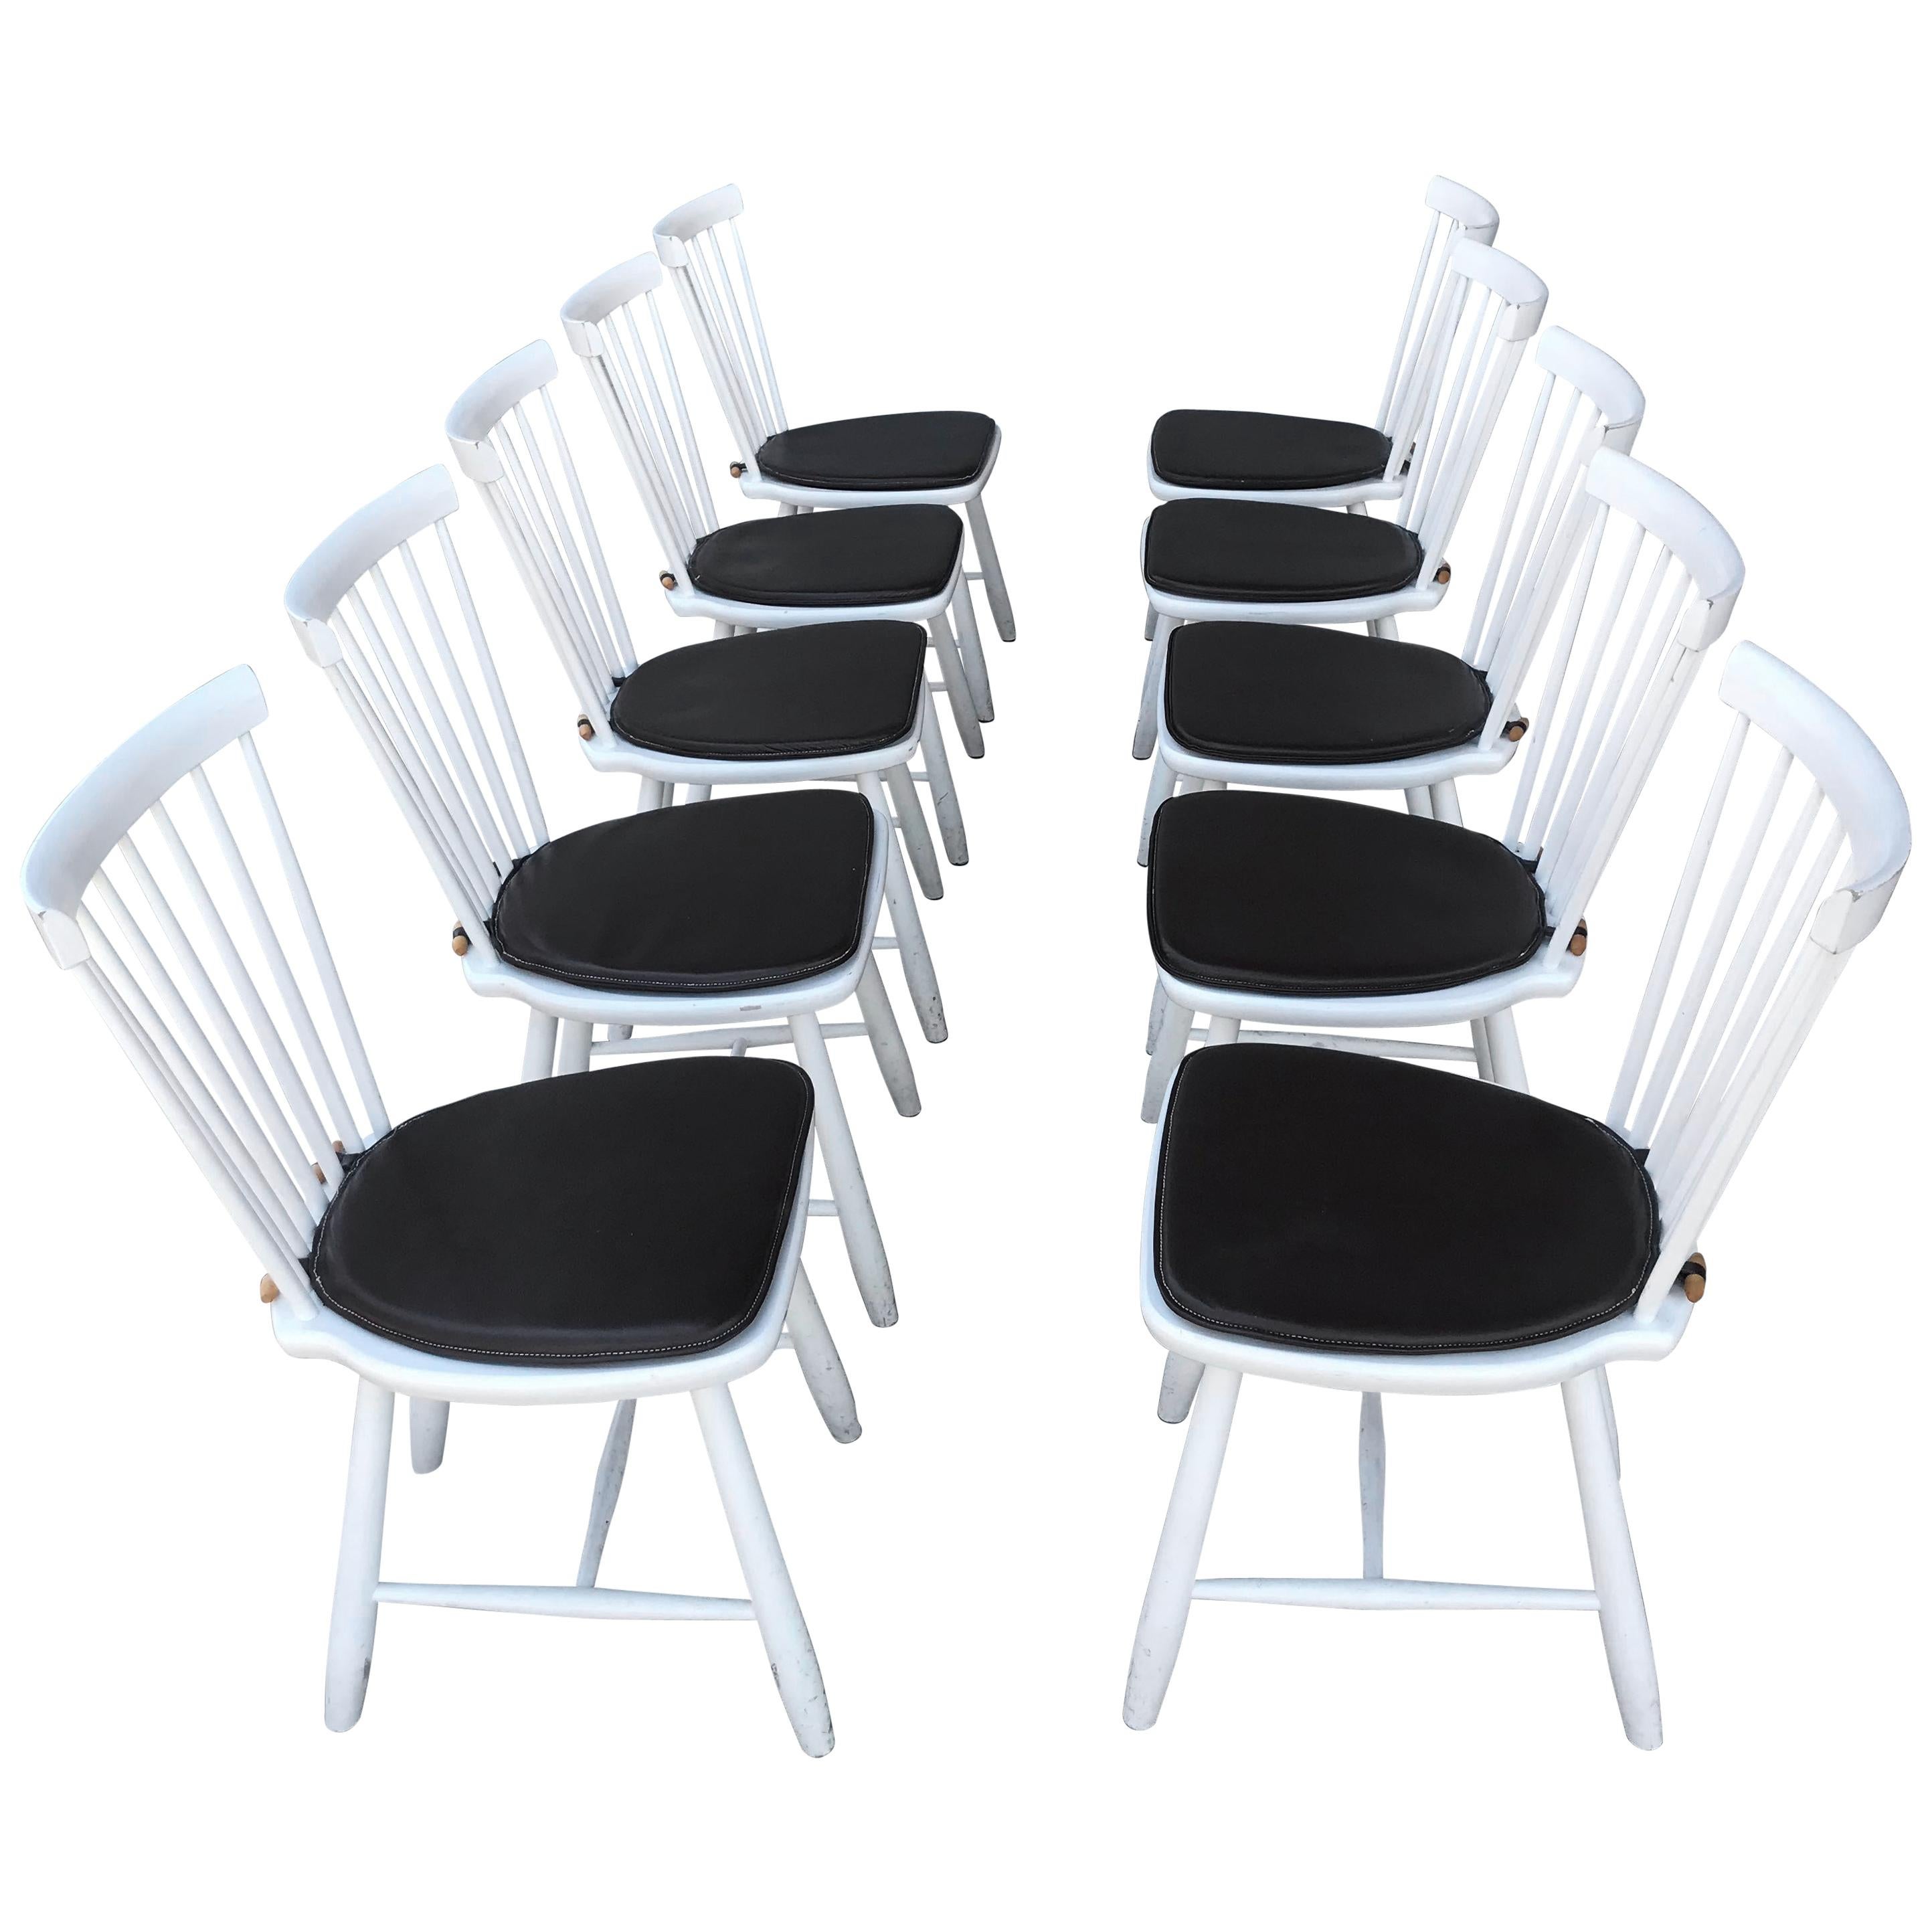 Stunning Set of 10 Dining Room Side Chairs Designed by Carl Malmsten for Stolab